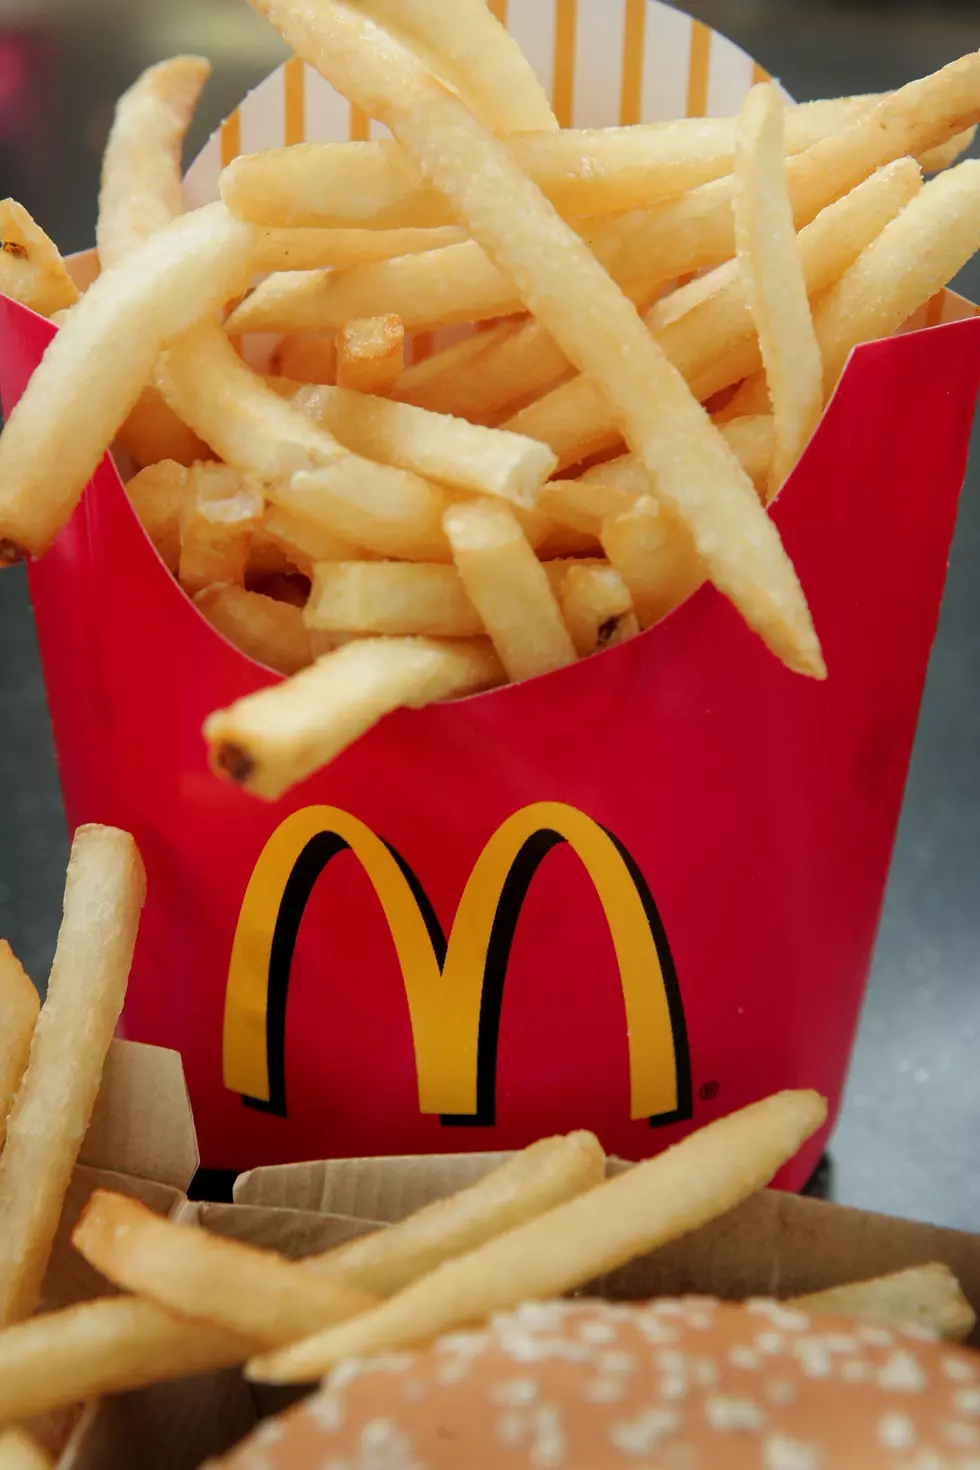 The Cure For Baldness Might Have Been Discovered in McDonald’s French Fries